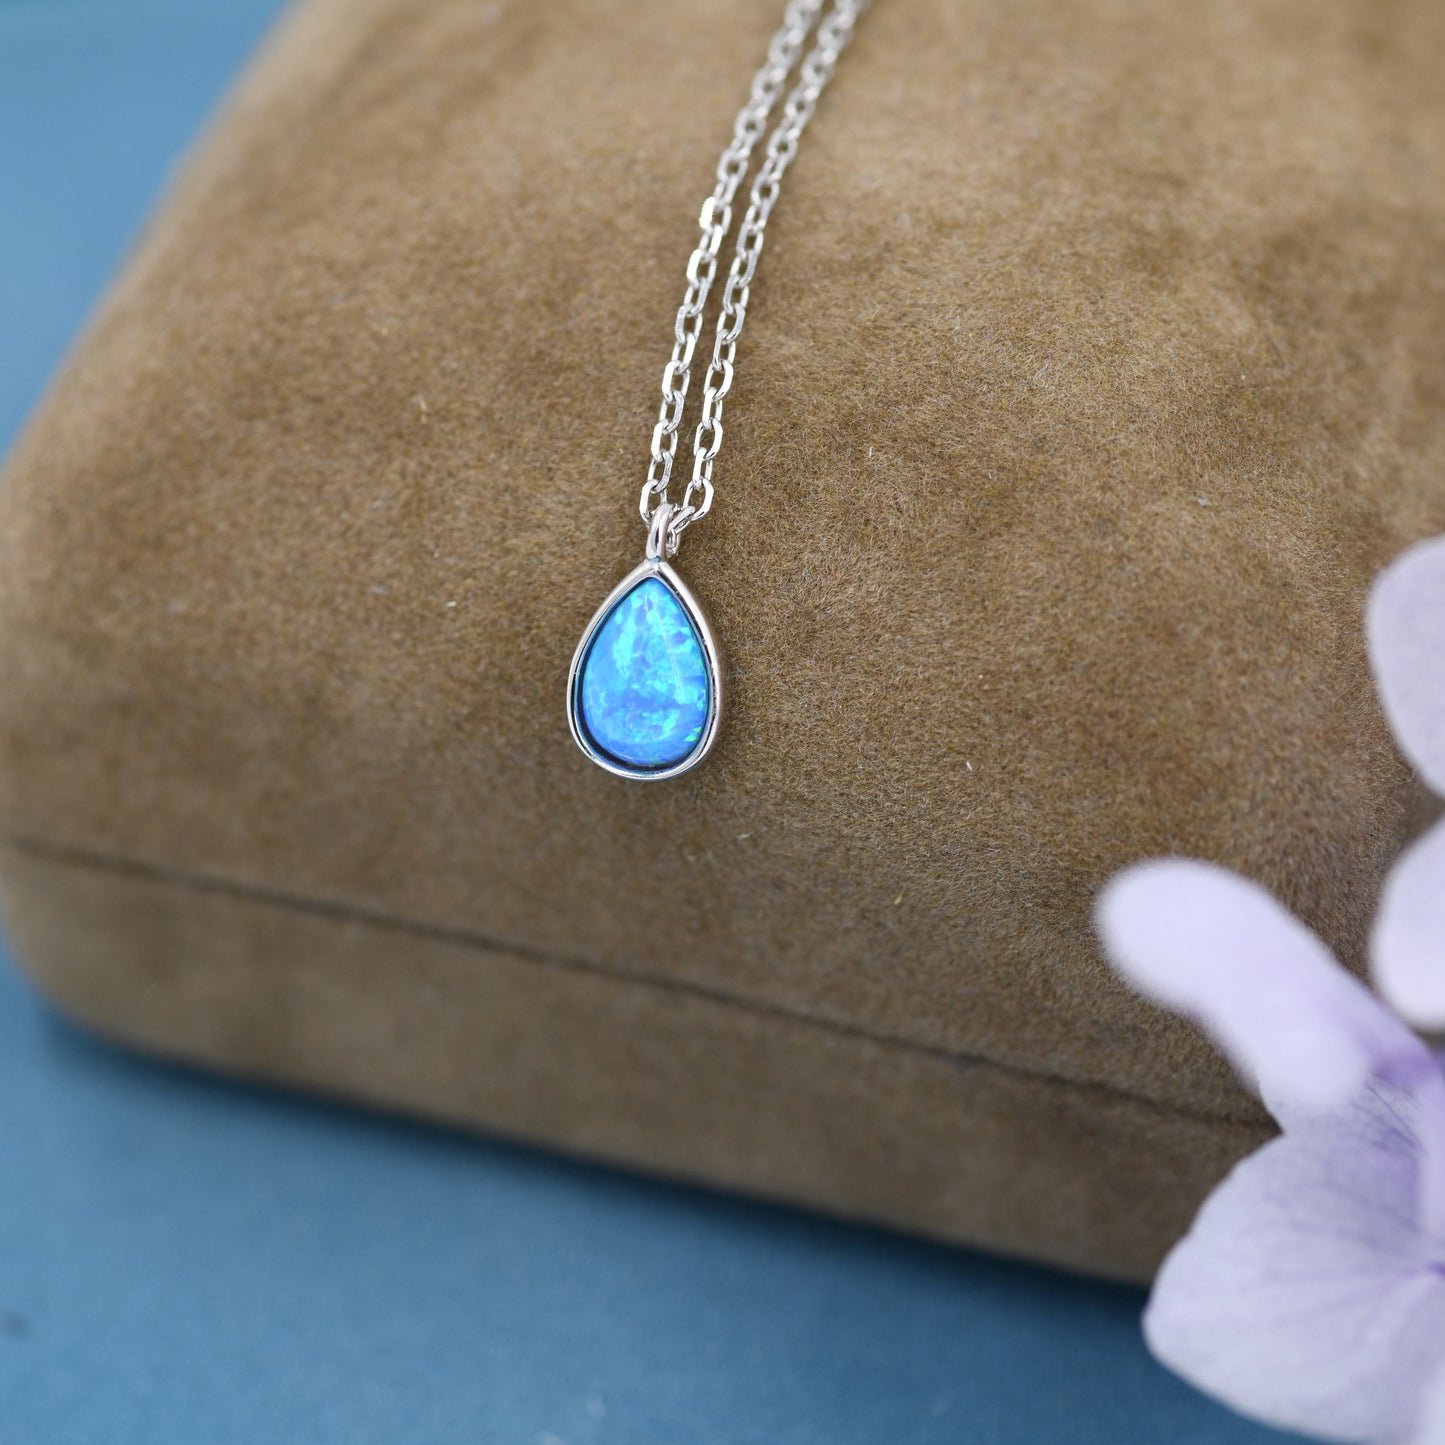 Blue Opal Droplet Pendant Necklace in Sterling Silver, Lab Opal Necklace,  Pear Shape Opal Necklace, Fire Opal Necklace